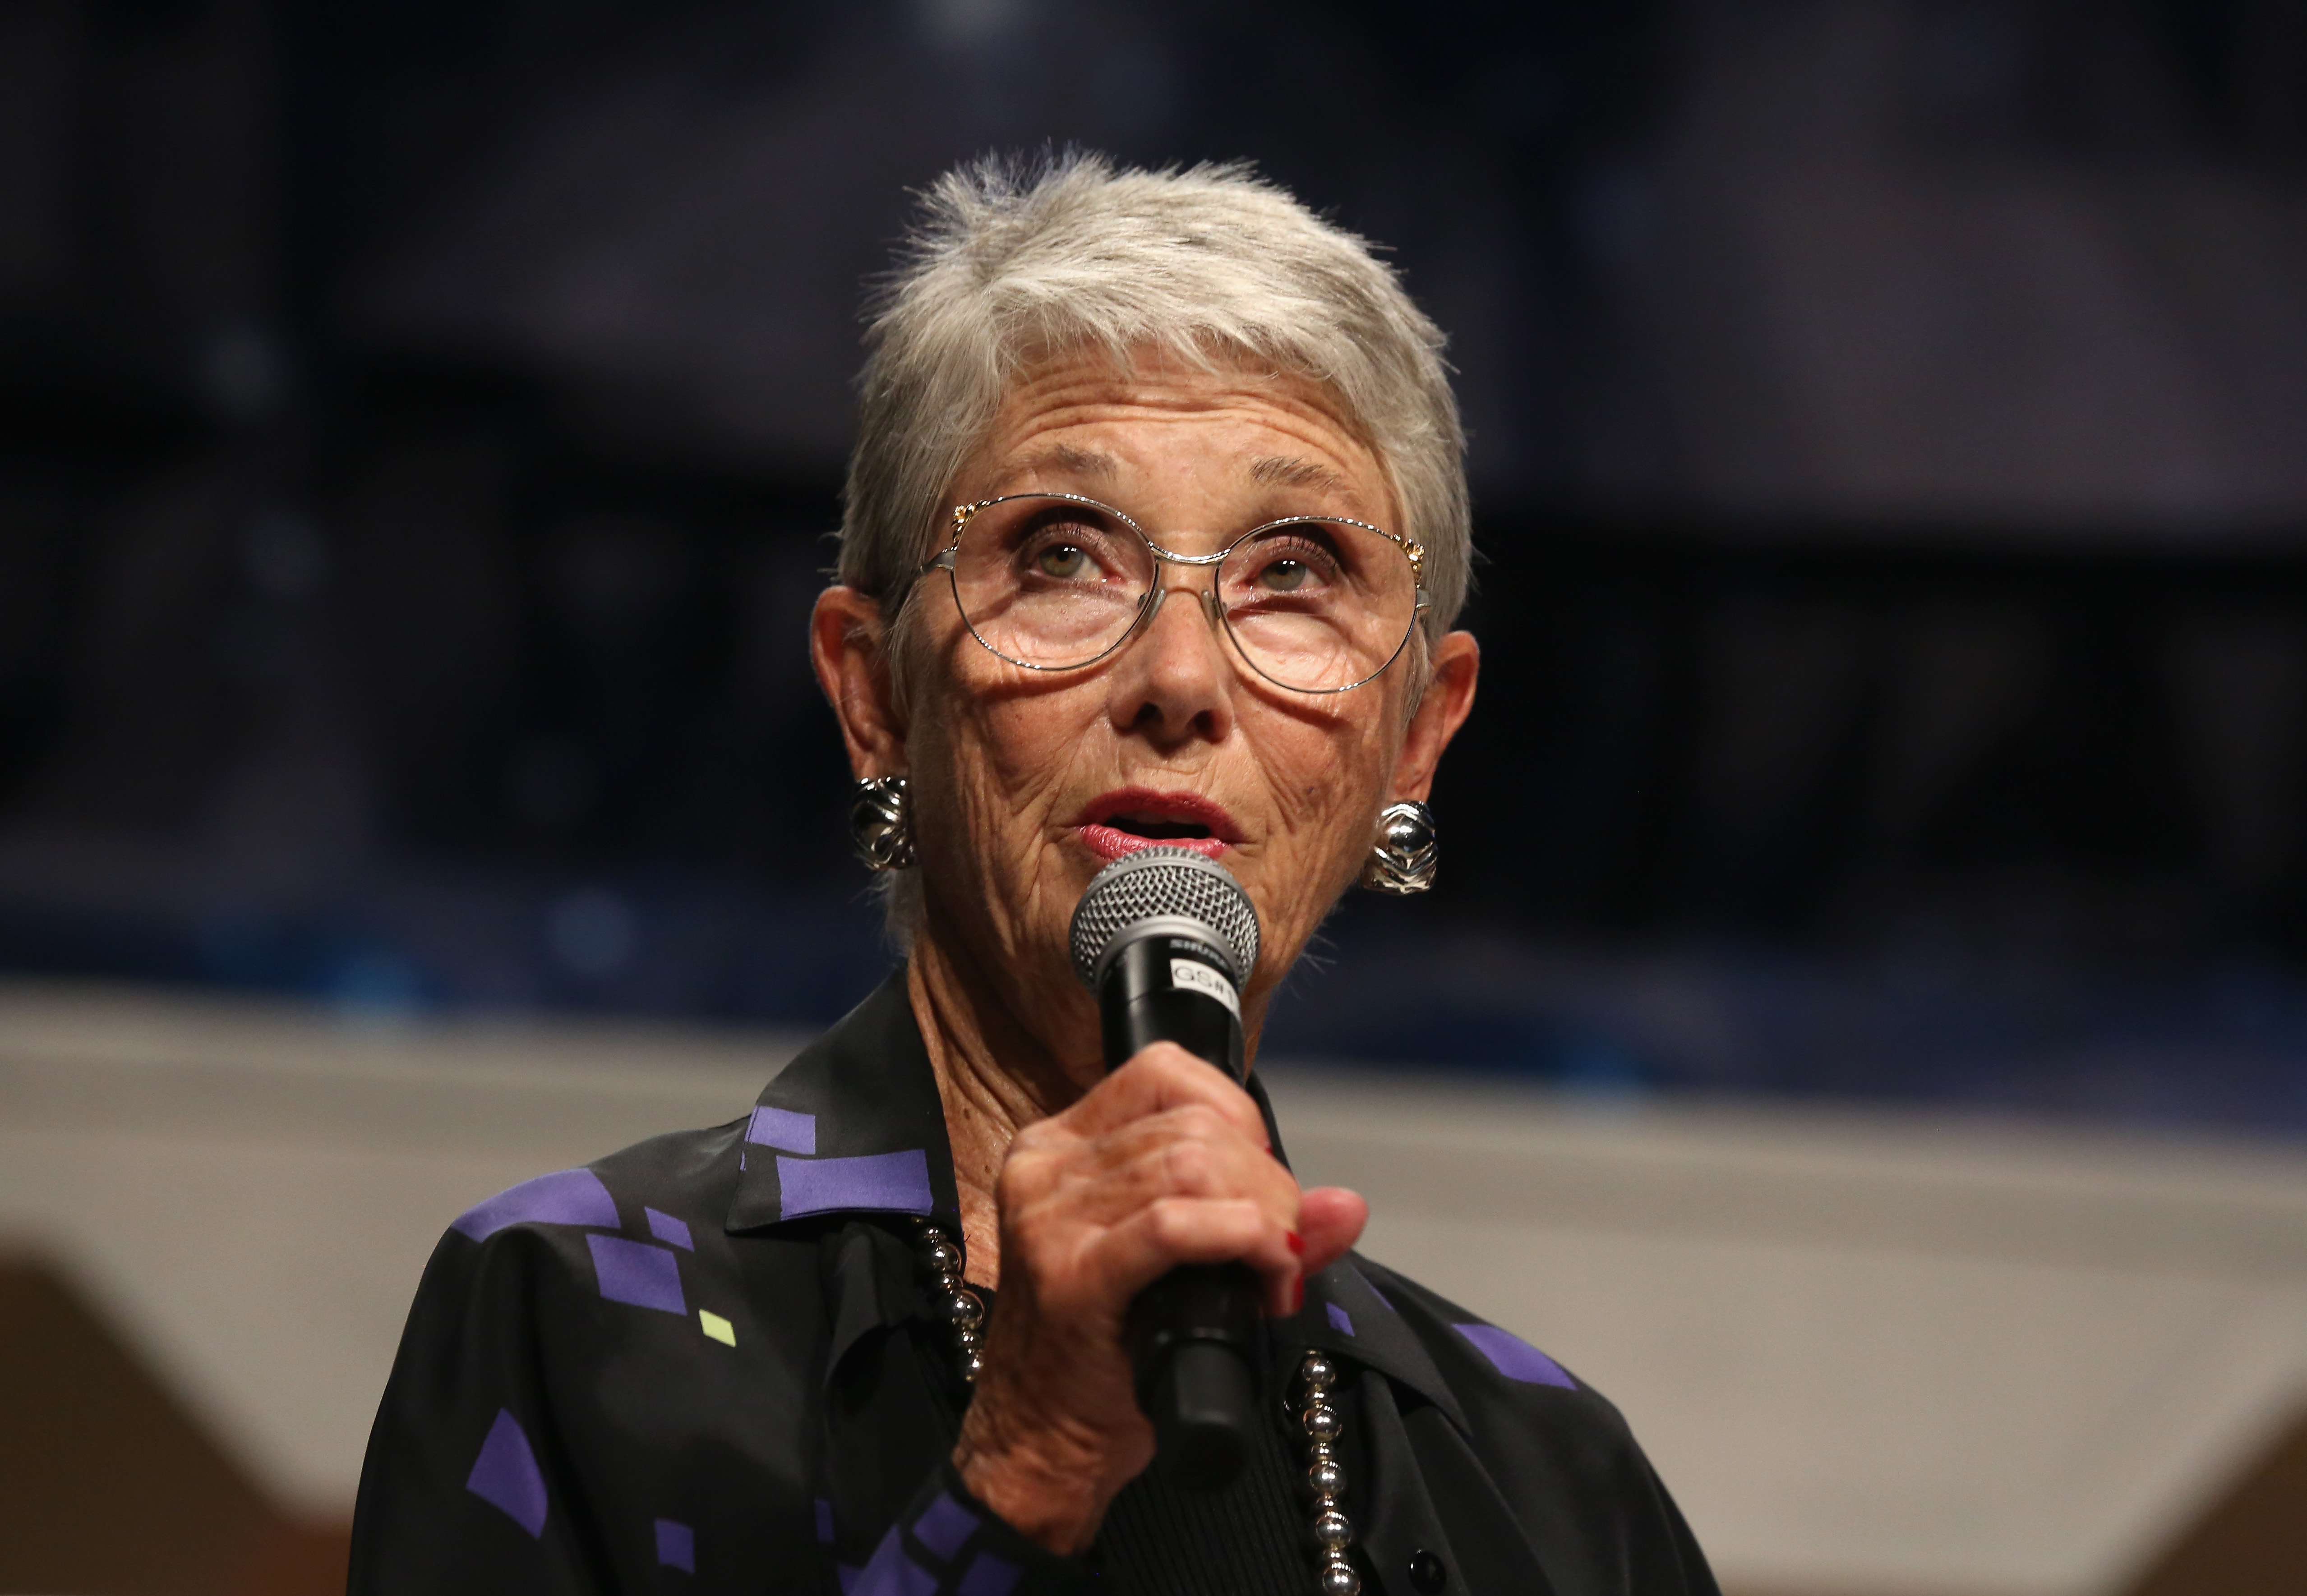 Elinor Donahue at the 15th Annual Official Star Trek Convention in Las Vegas in 2016 | Source: Getty Images